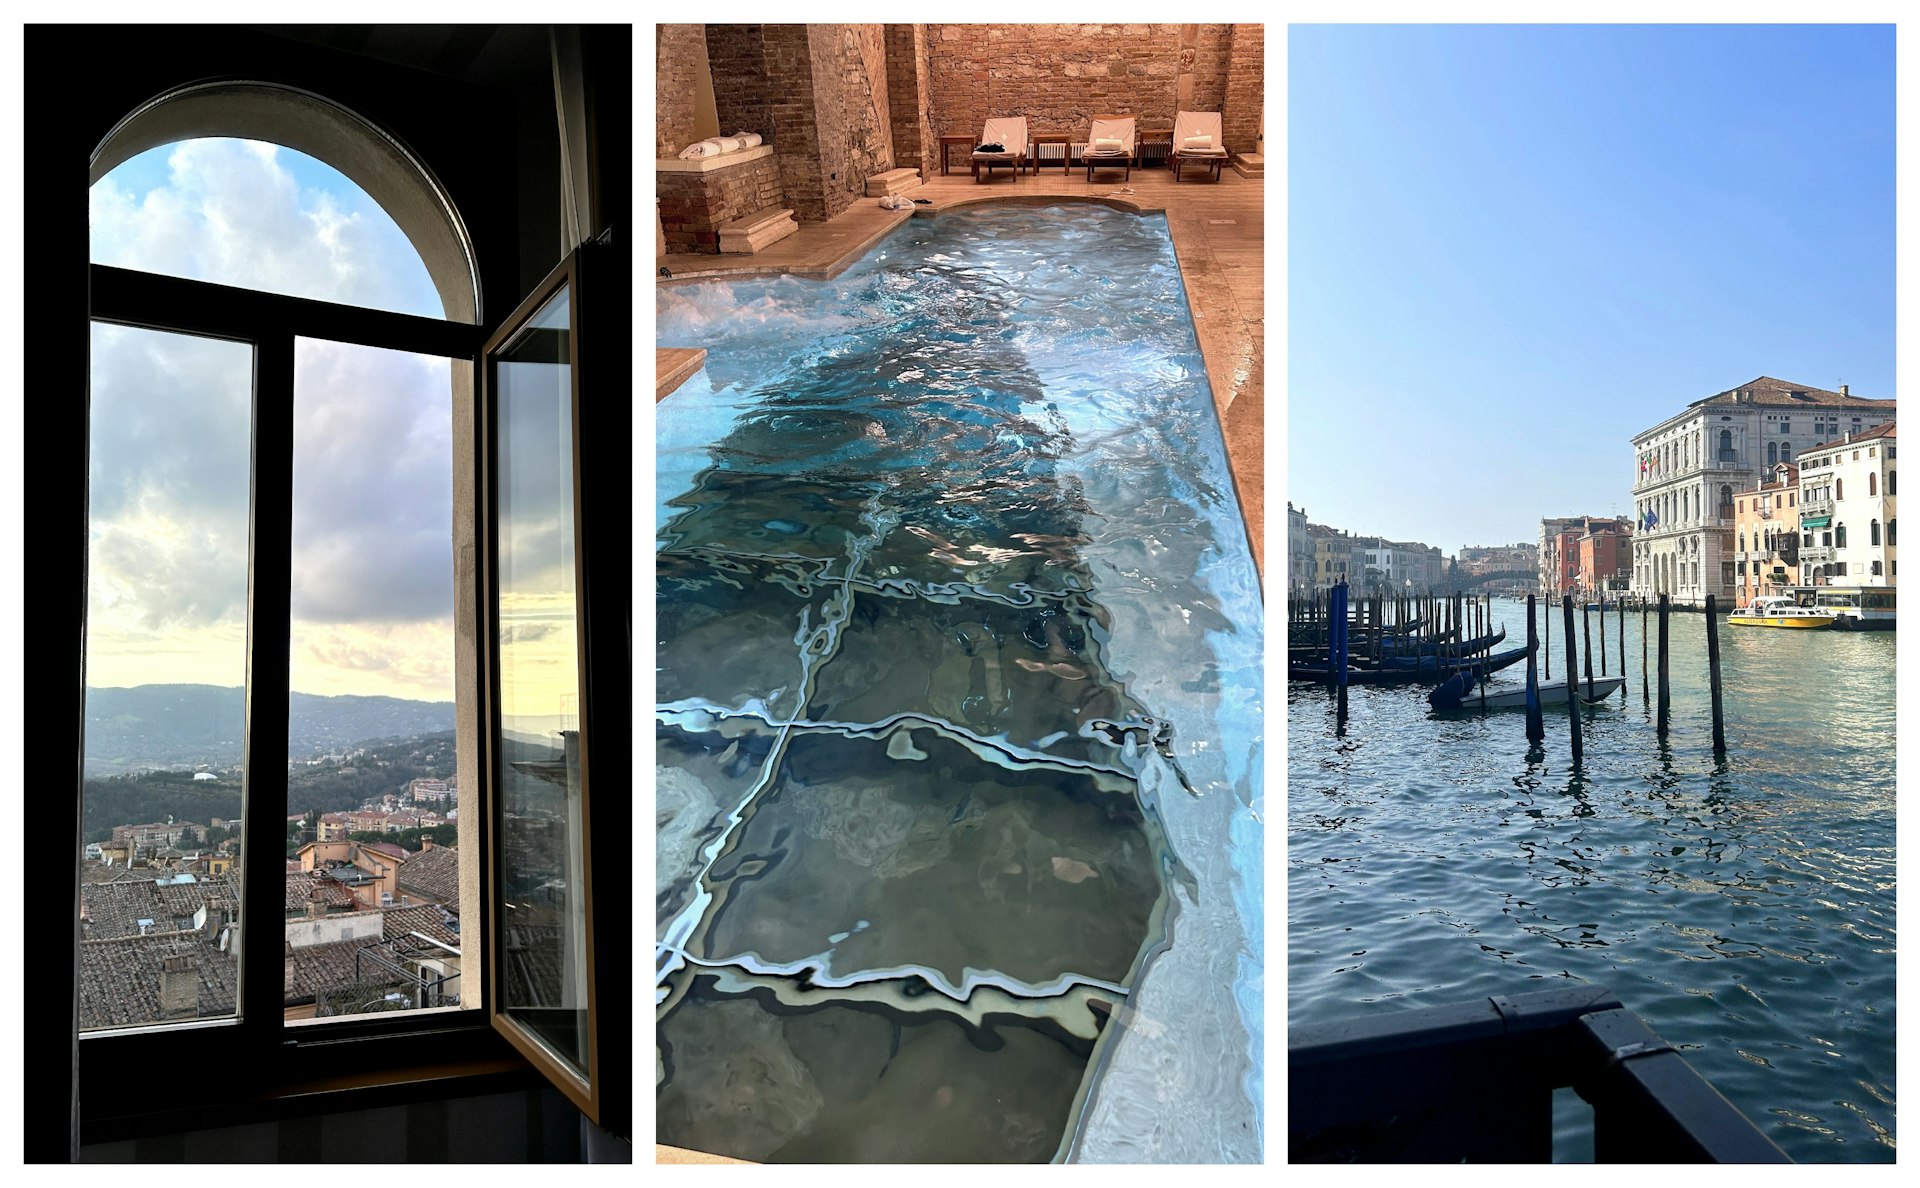 Left: A view of the town of Perugia framed by a window; Middle: a swimming pool with glass on its floor that looks over ruins; Right: a view of the Grand Canal in Venice